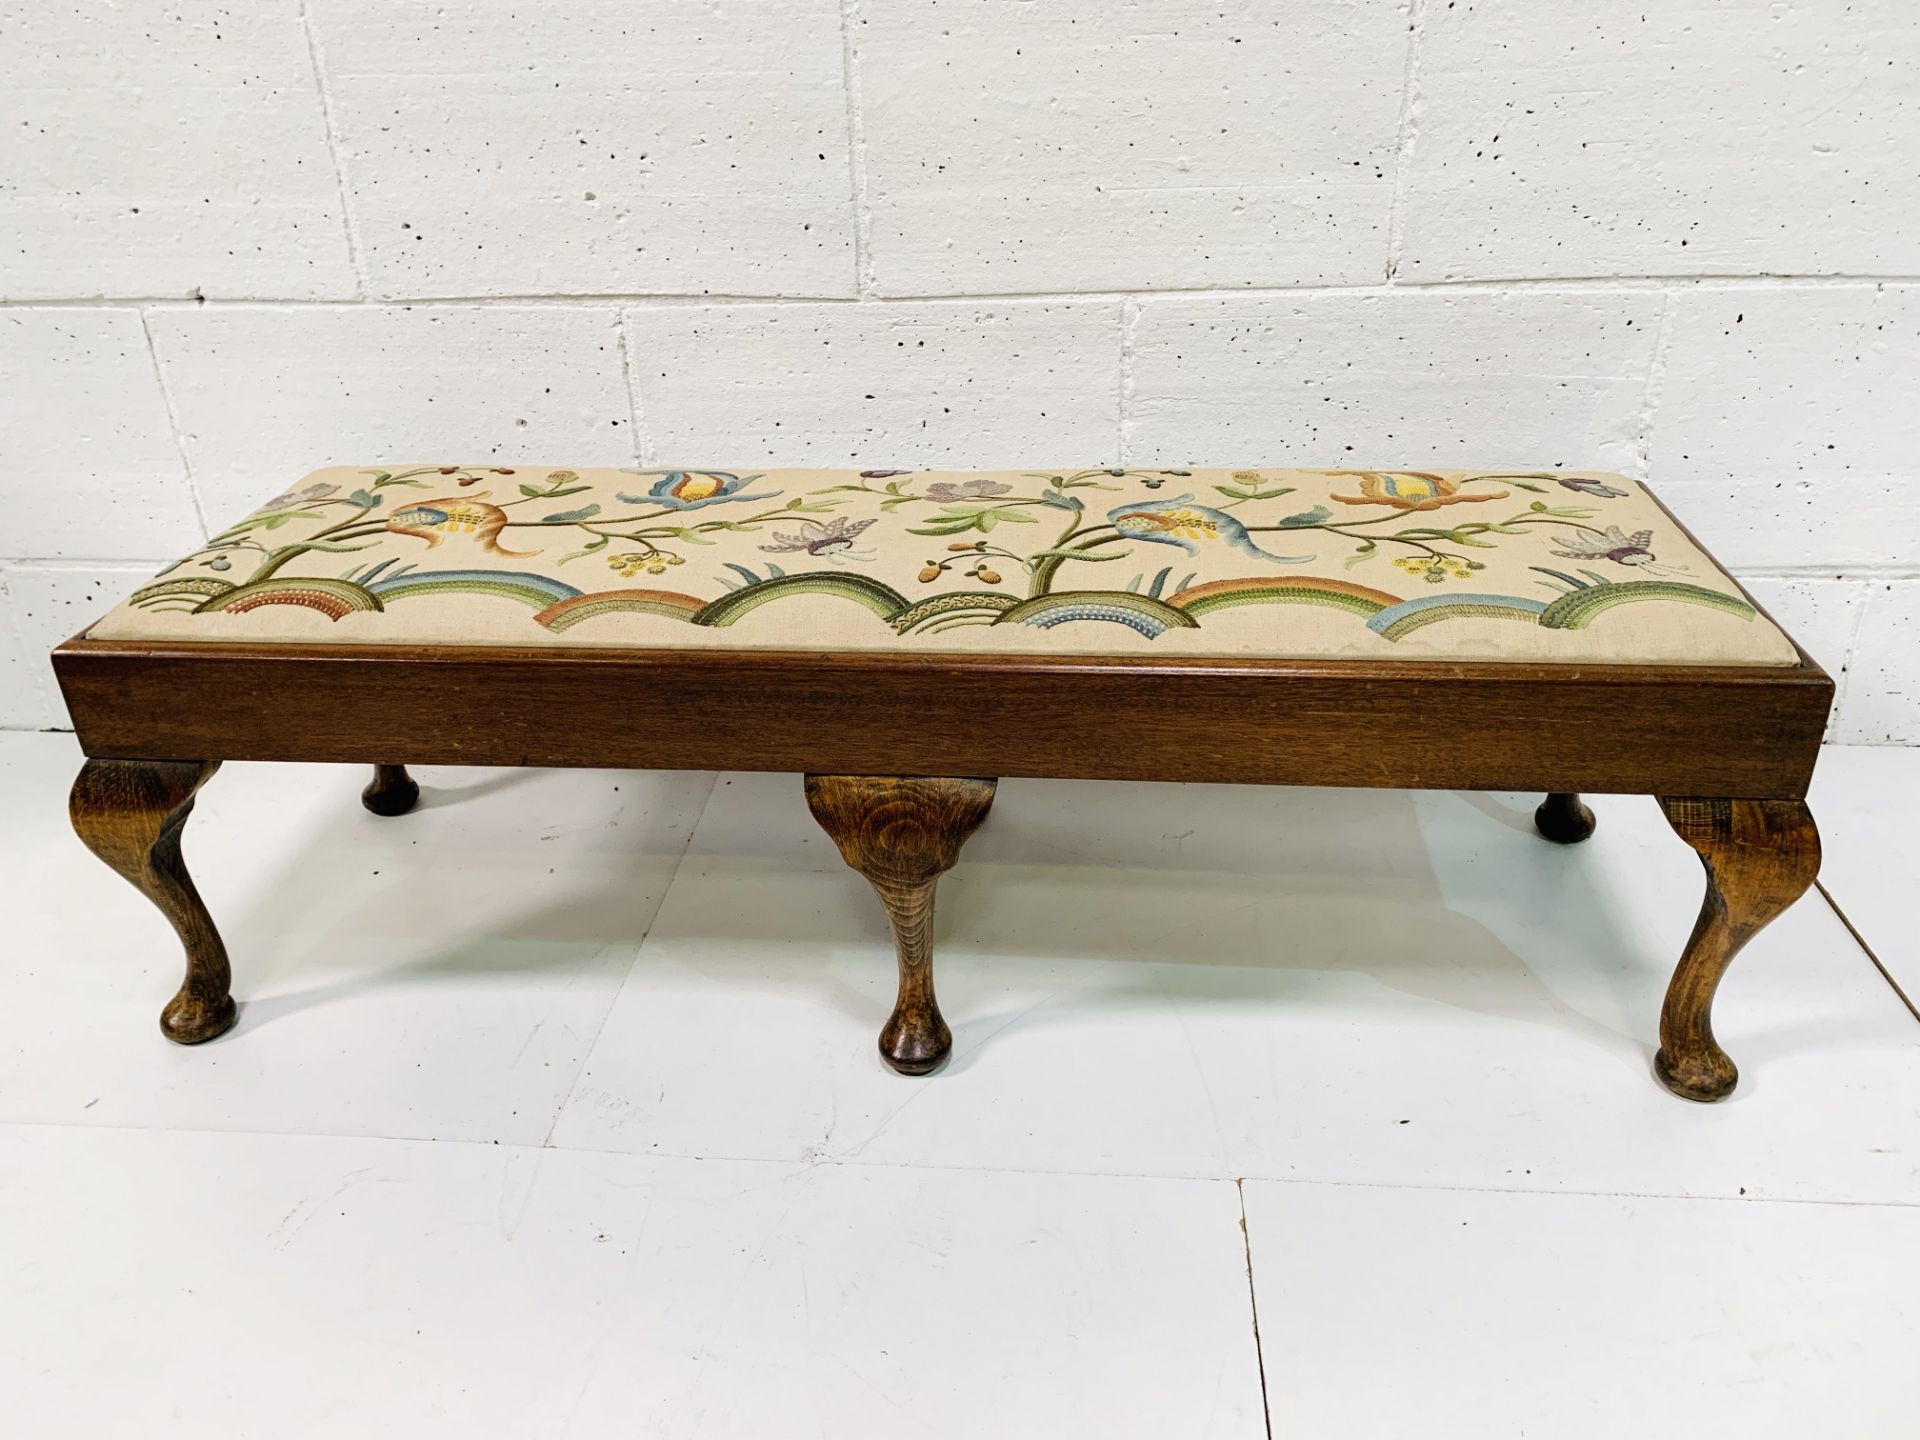 Oak framed long stool with tapestry seat depicting flowers. - Image 2 of 4